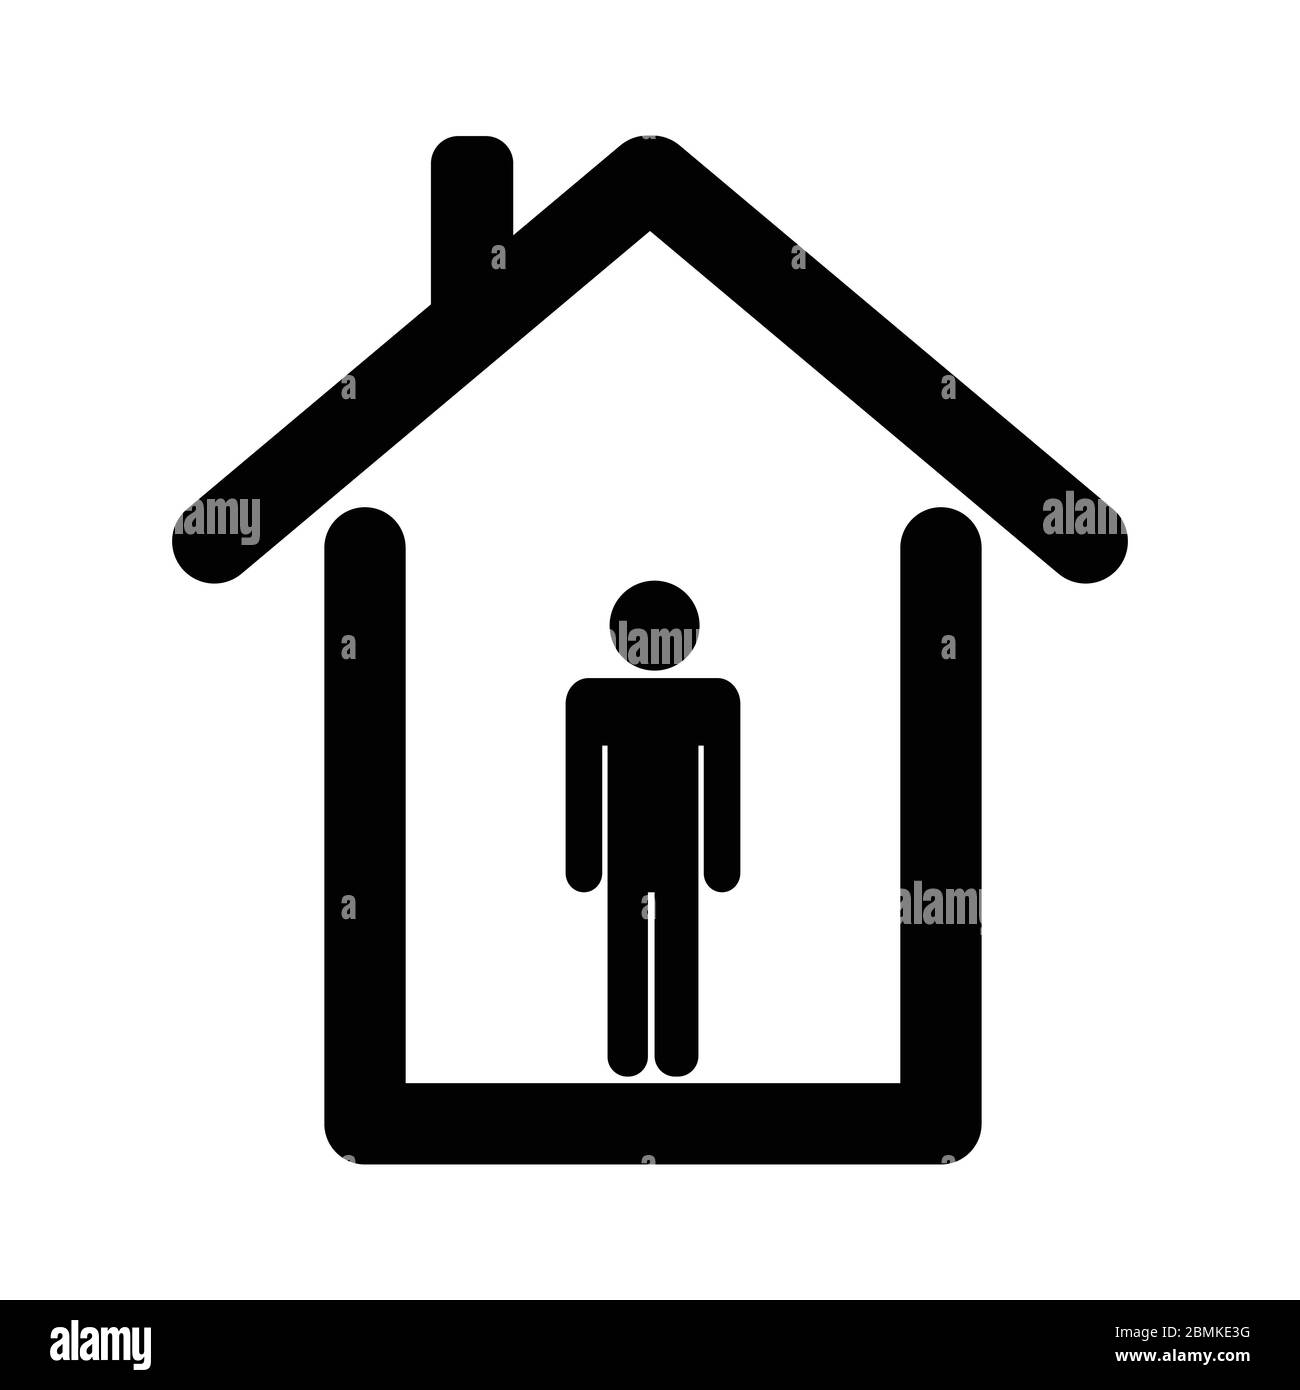 Stay at Home Quarintine Black Illustration Pcitogram Ico. EPS Vector Stock Vector